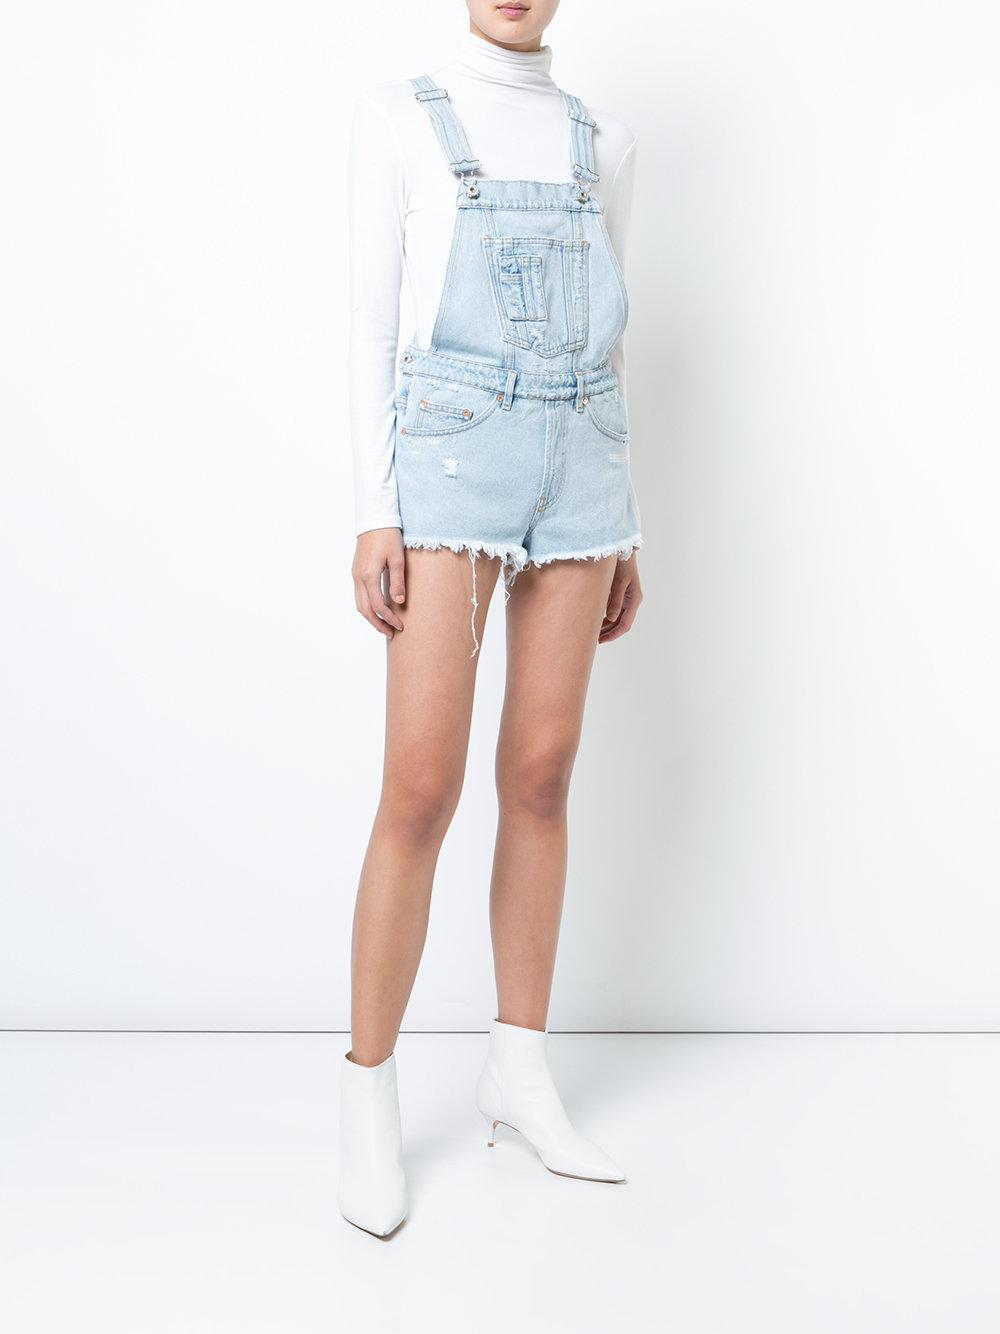 Off-White c/o Virgil Abloh Dungarees Playsuit in Blue -